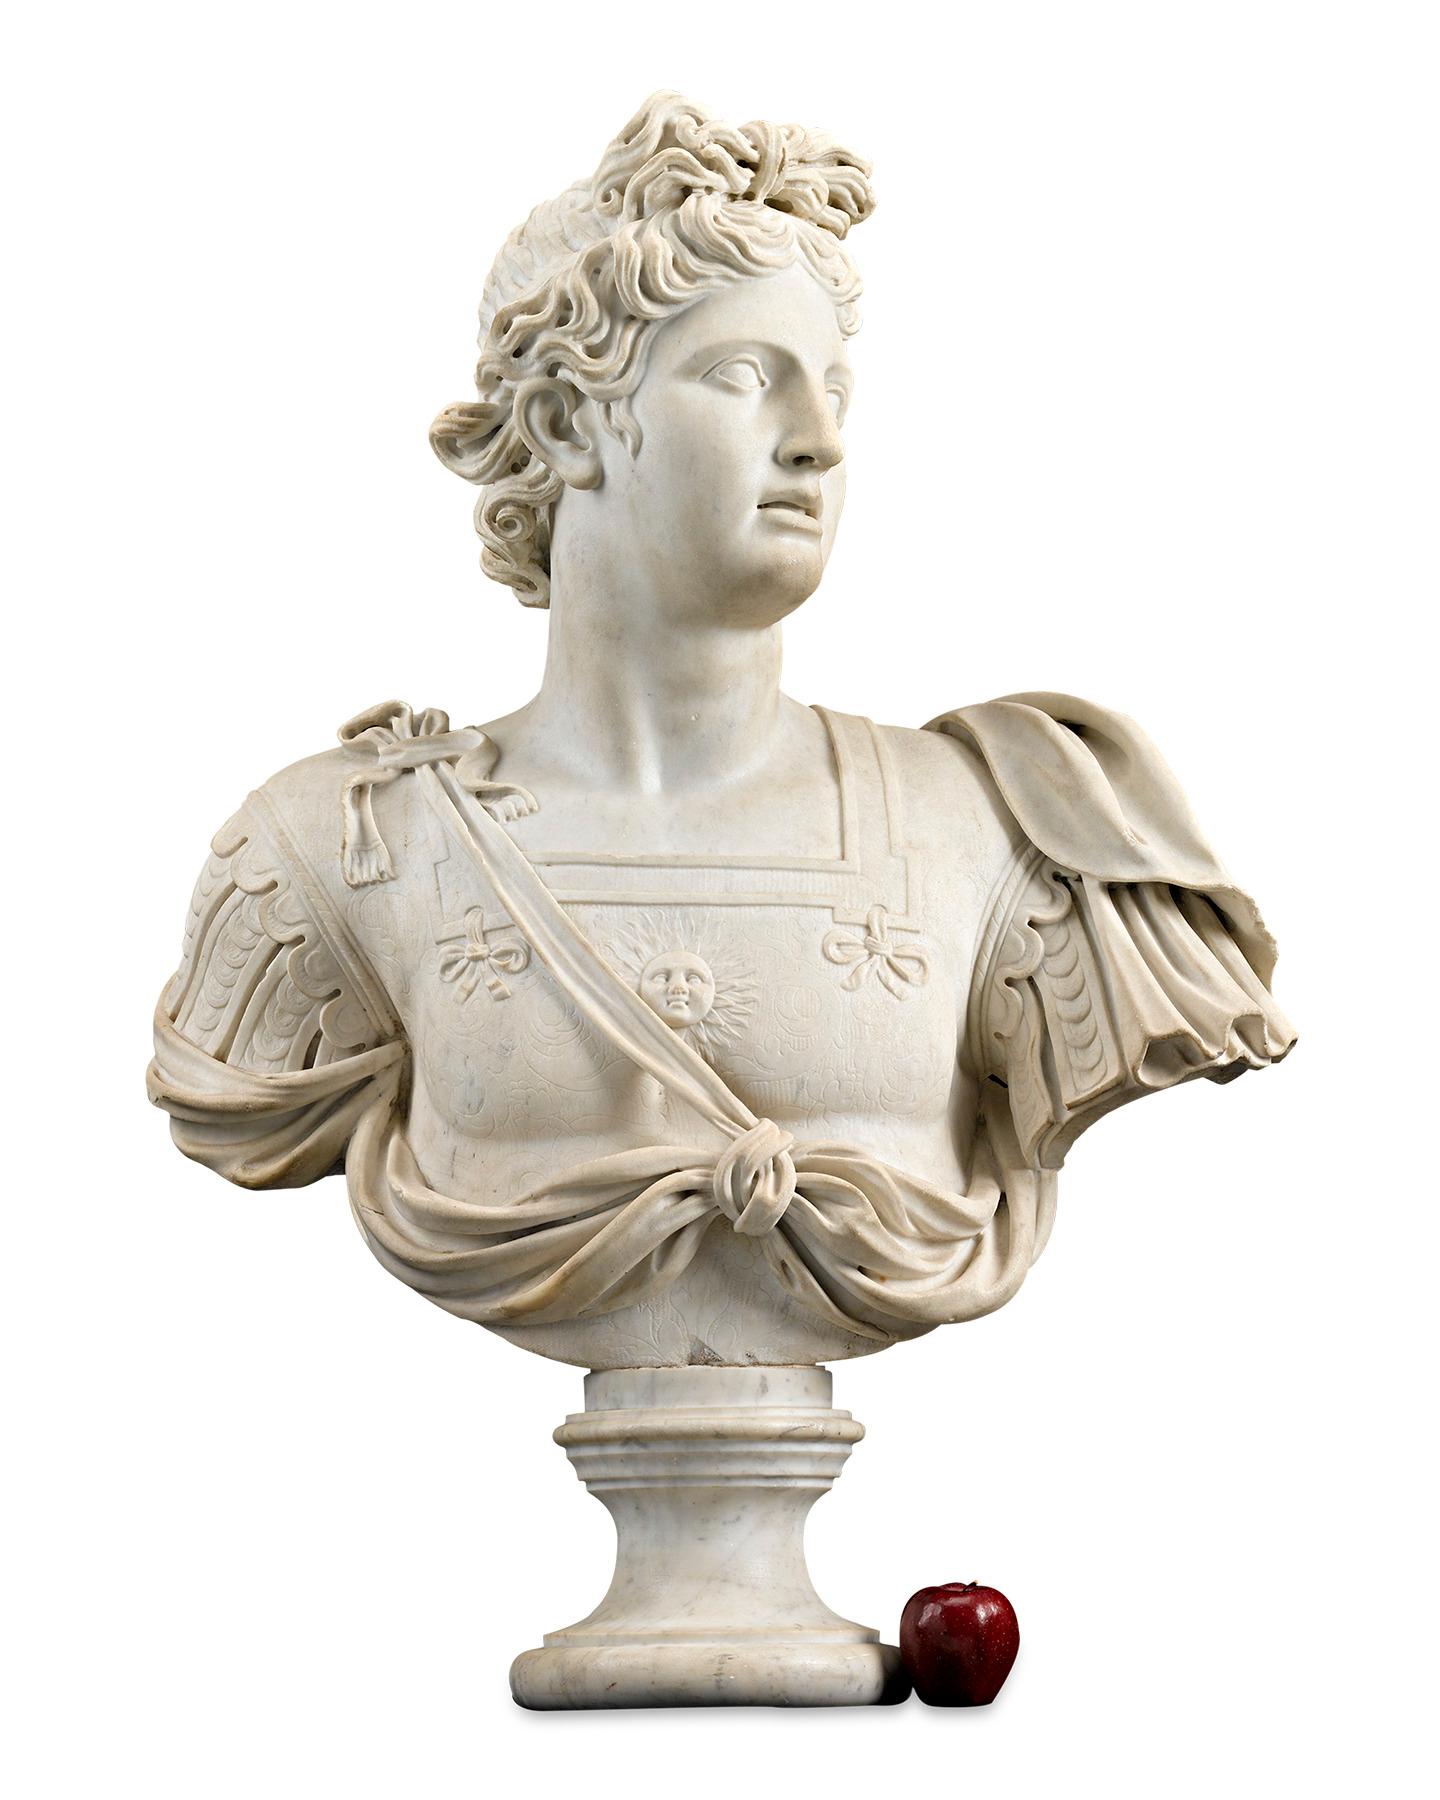 An imposing work of extraordinary artistry, this marble bust captures the visage of Apollo, the handsome god who is one of the most legendary Olympian deities from antiquity. The son of Zeus and Leto, and twin brother of the huntress Artemis, he was